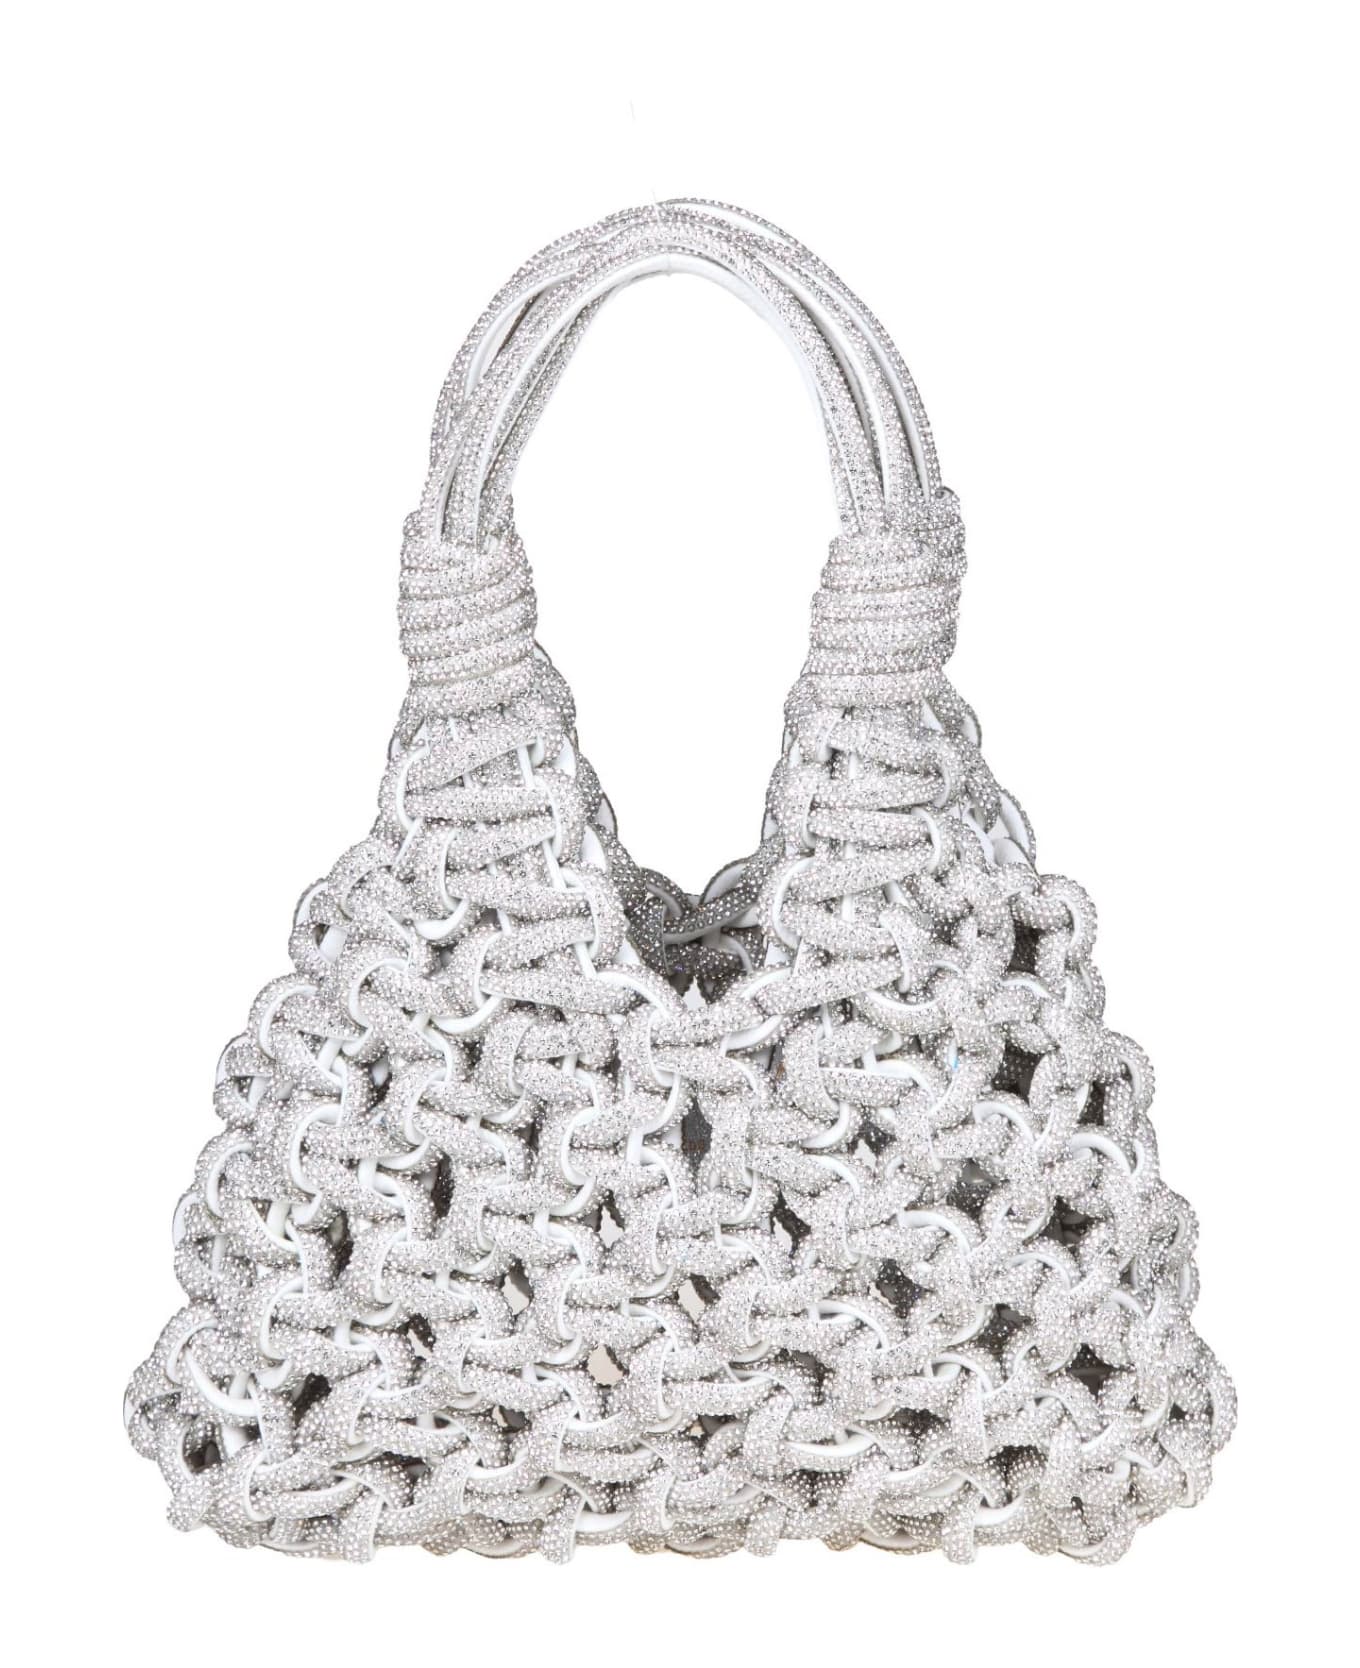 Hibourama Jewel Bag With Weaving And Applied Crystals - CRYSTALS 